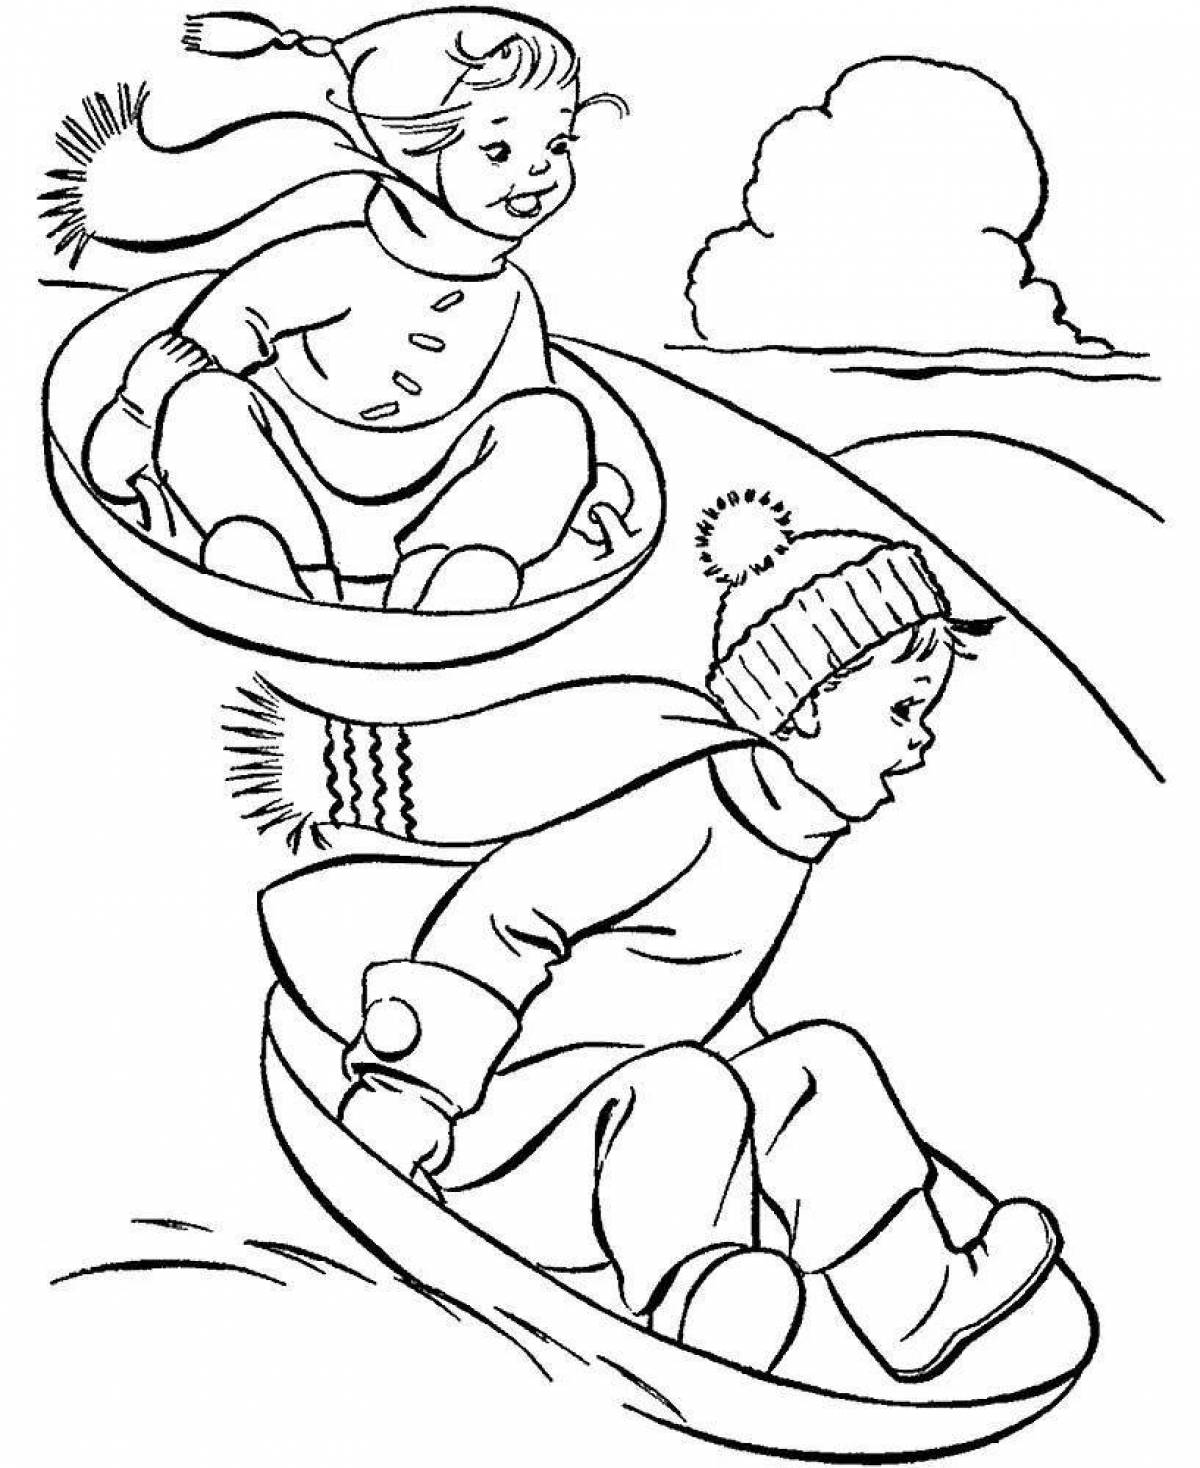 Sparkling children's coloring book on a sled